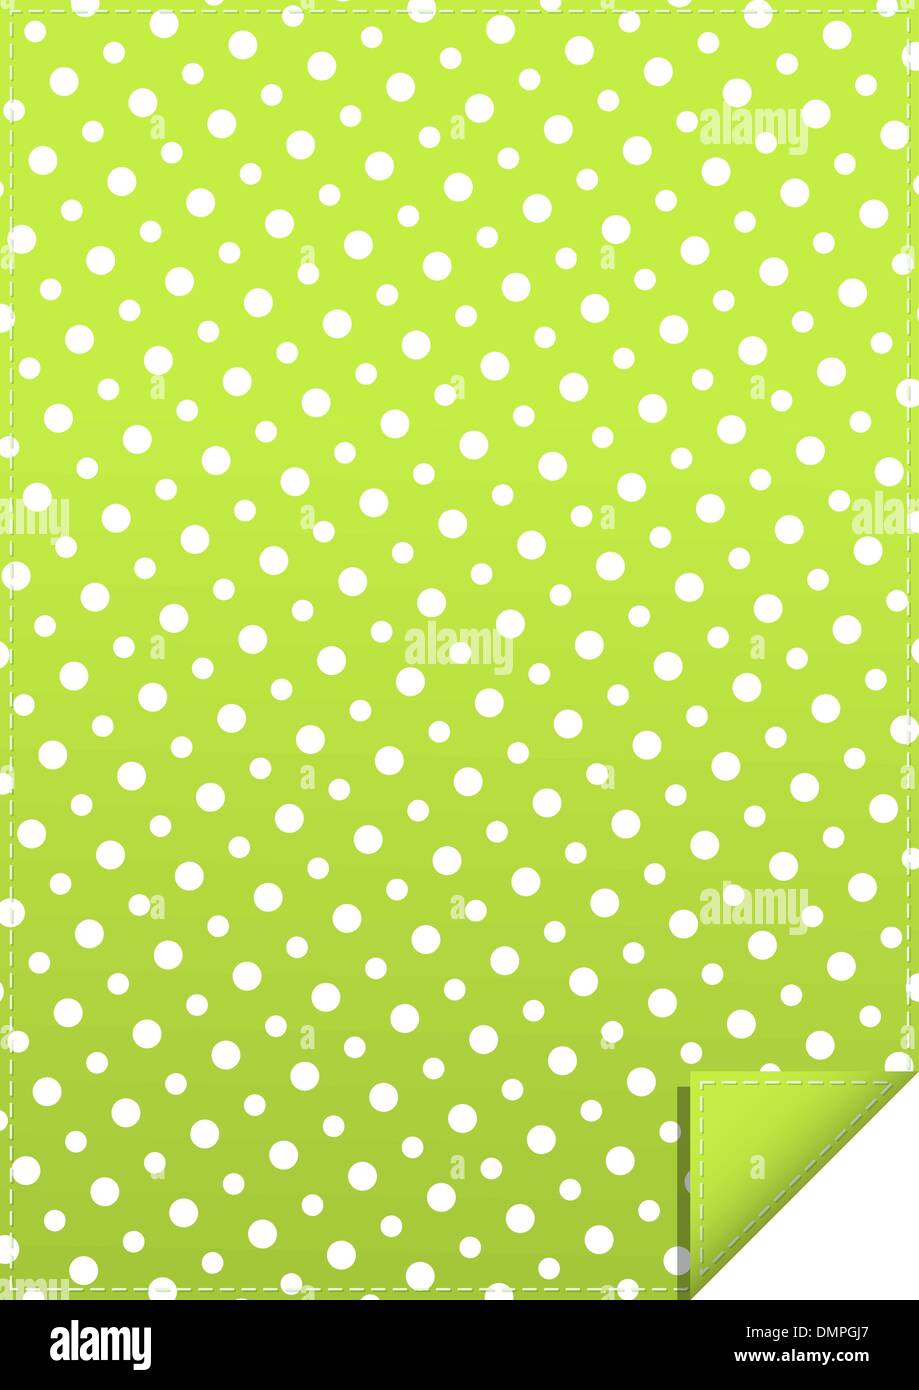 dotted stitched background Stock Vector